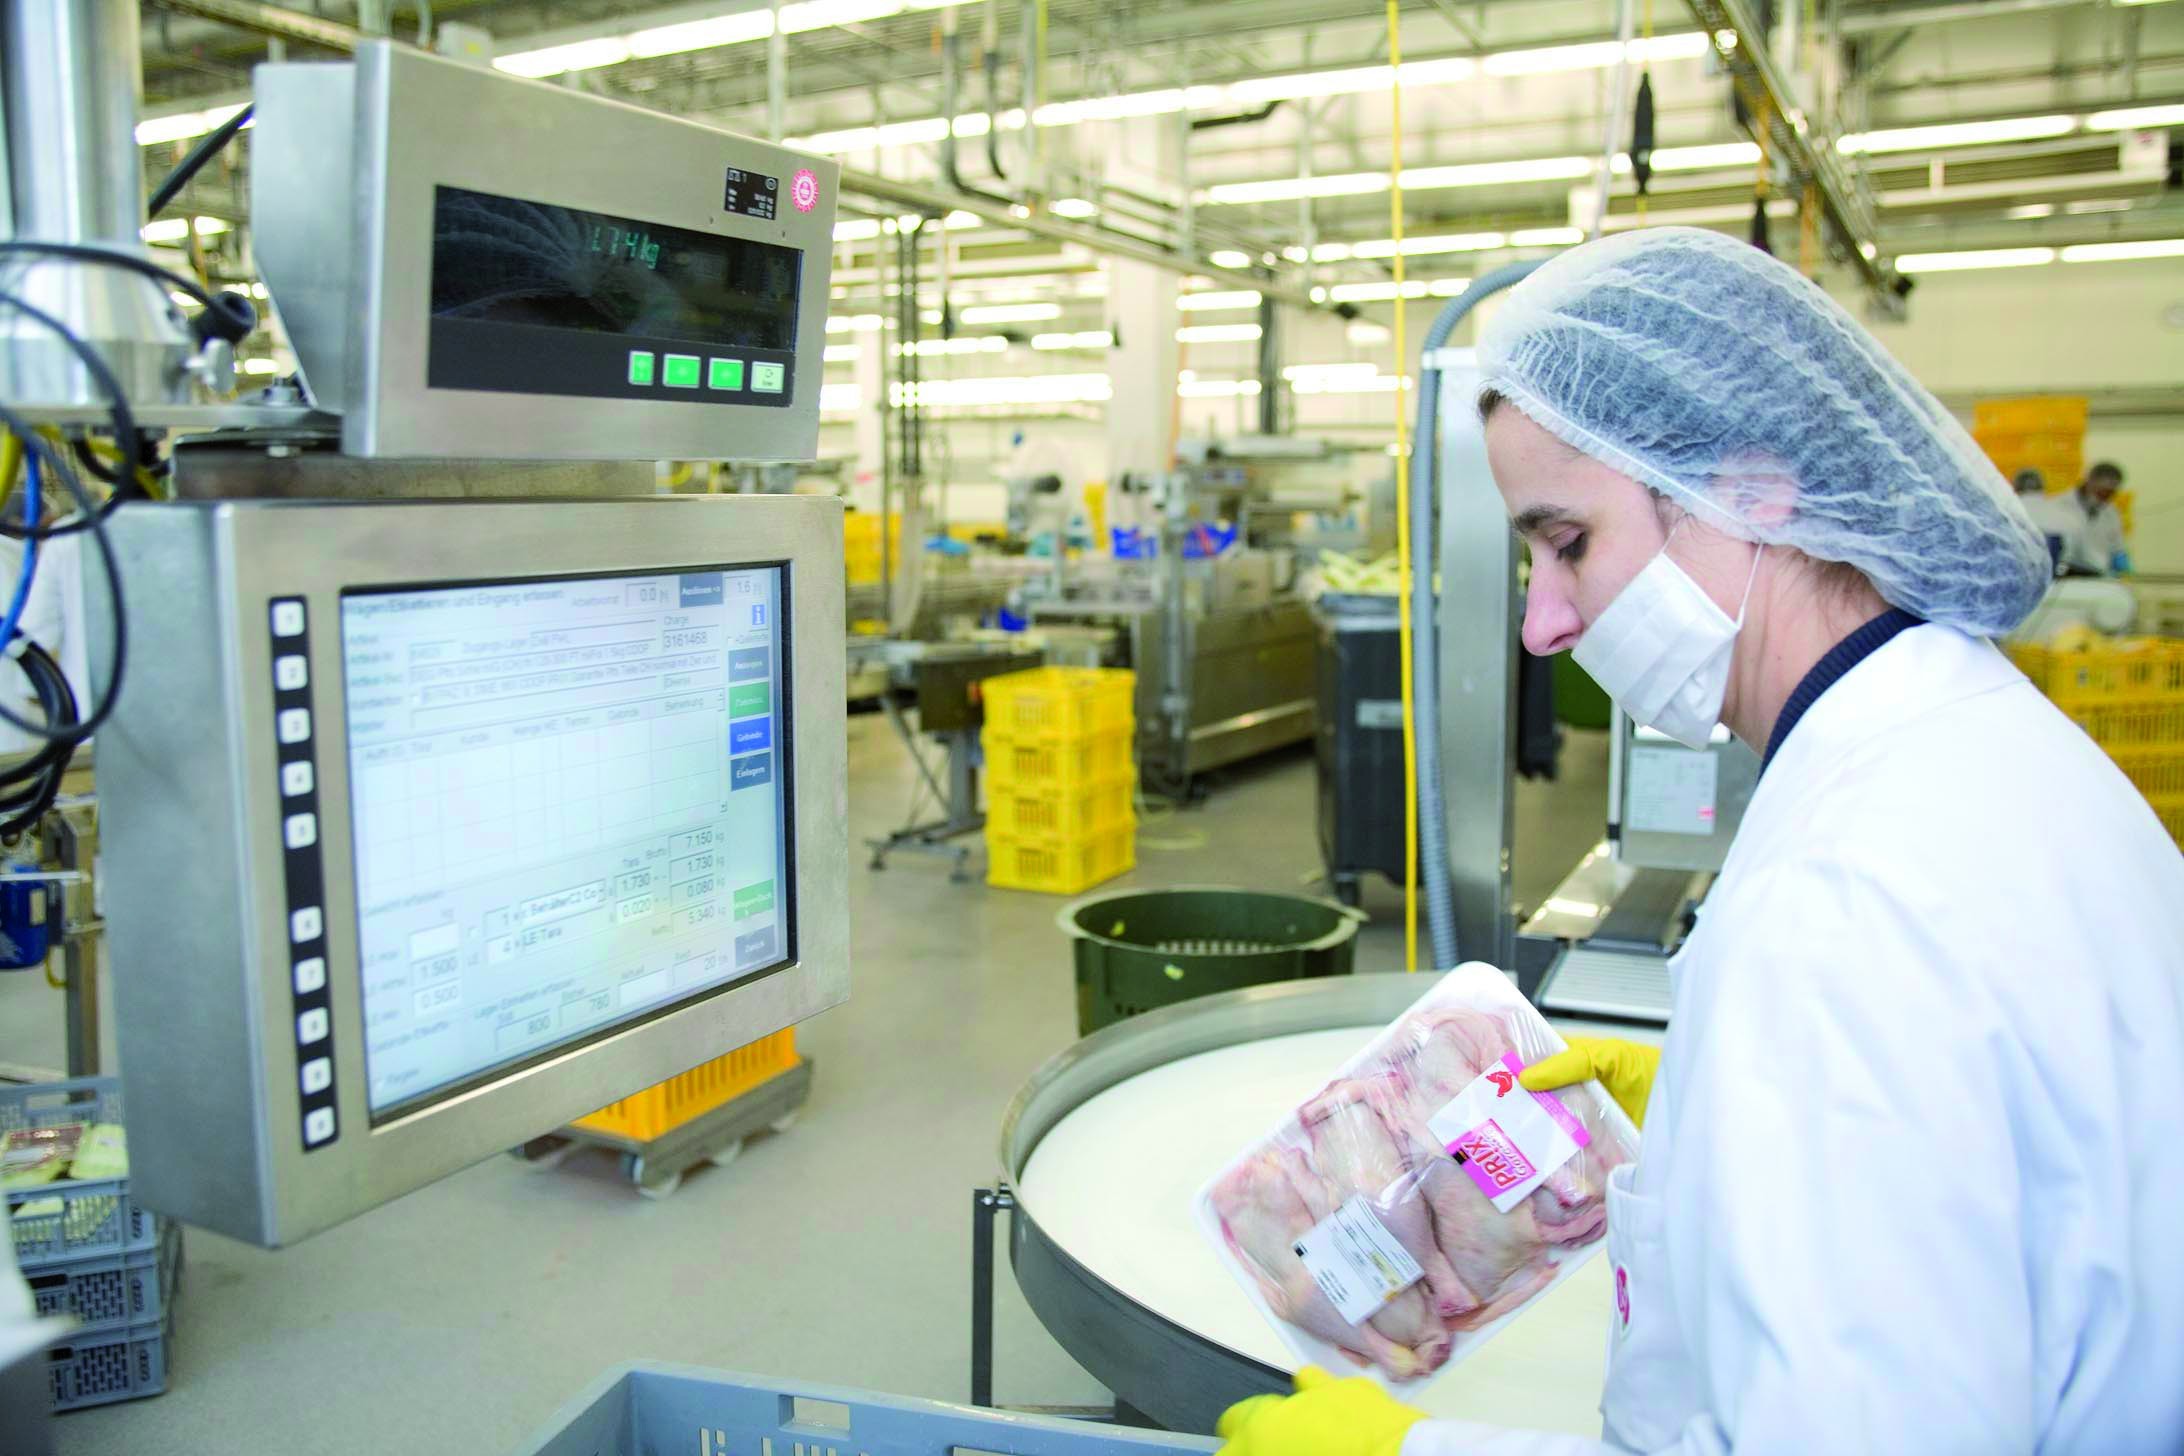 Factory worker in a food processing plant using an industrial computer